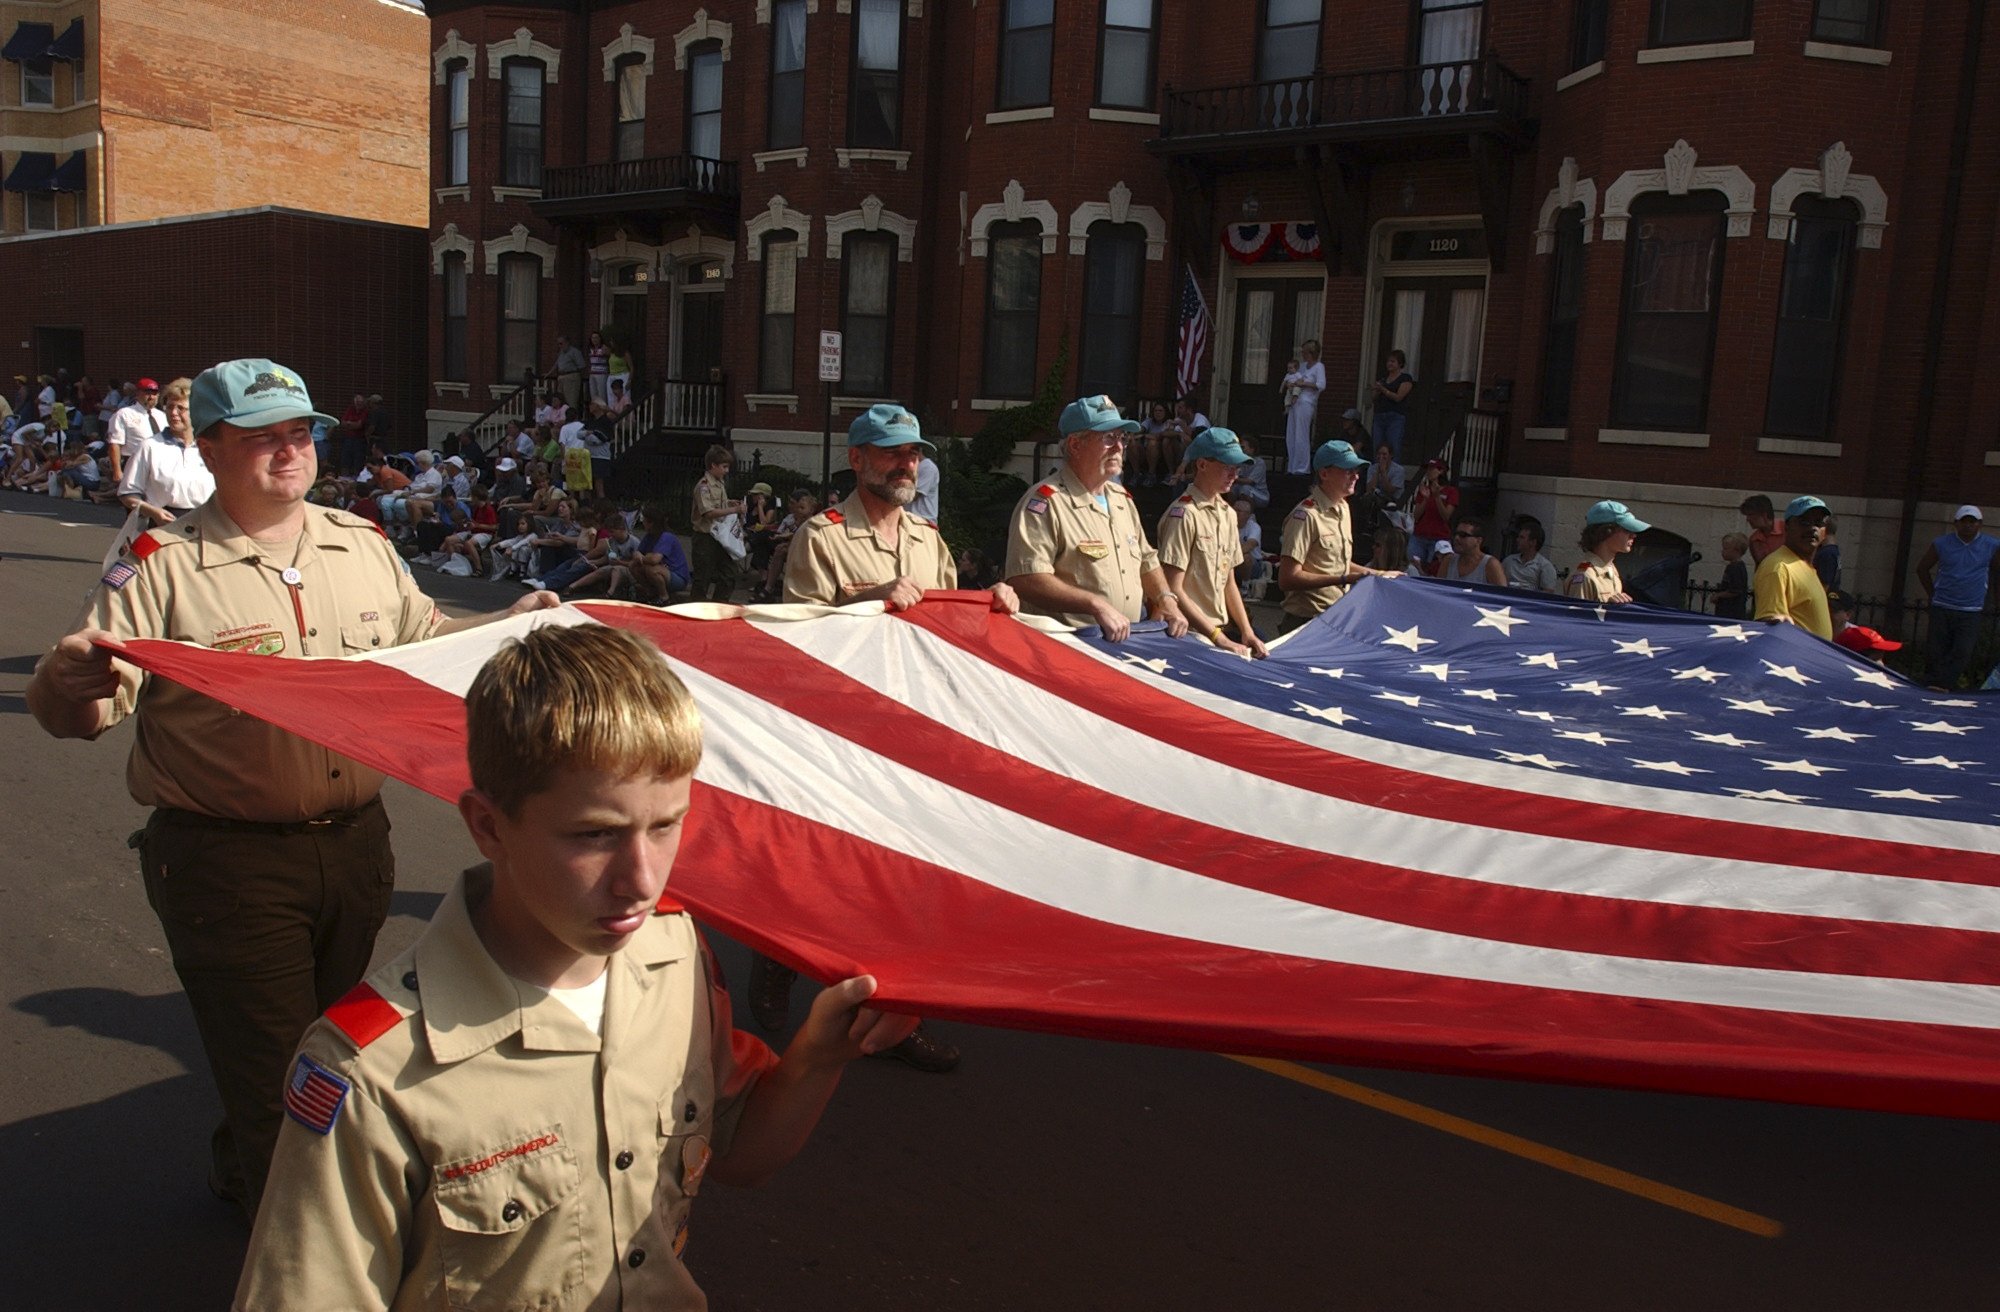  Donald Schmitt, 13. of Boy Scout troop 94, carries the American flag in the Dubuque Labor Day parade. 